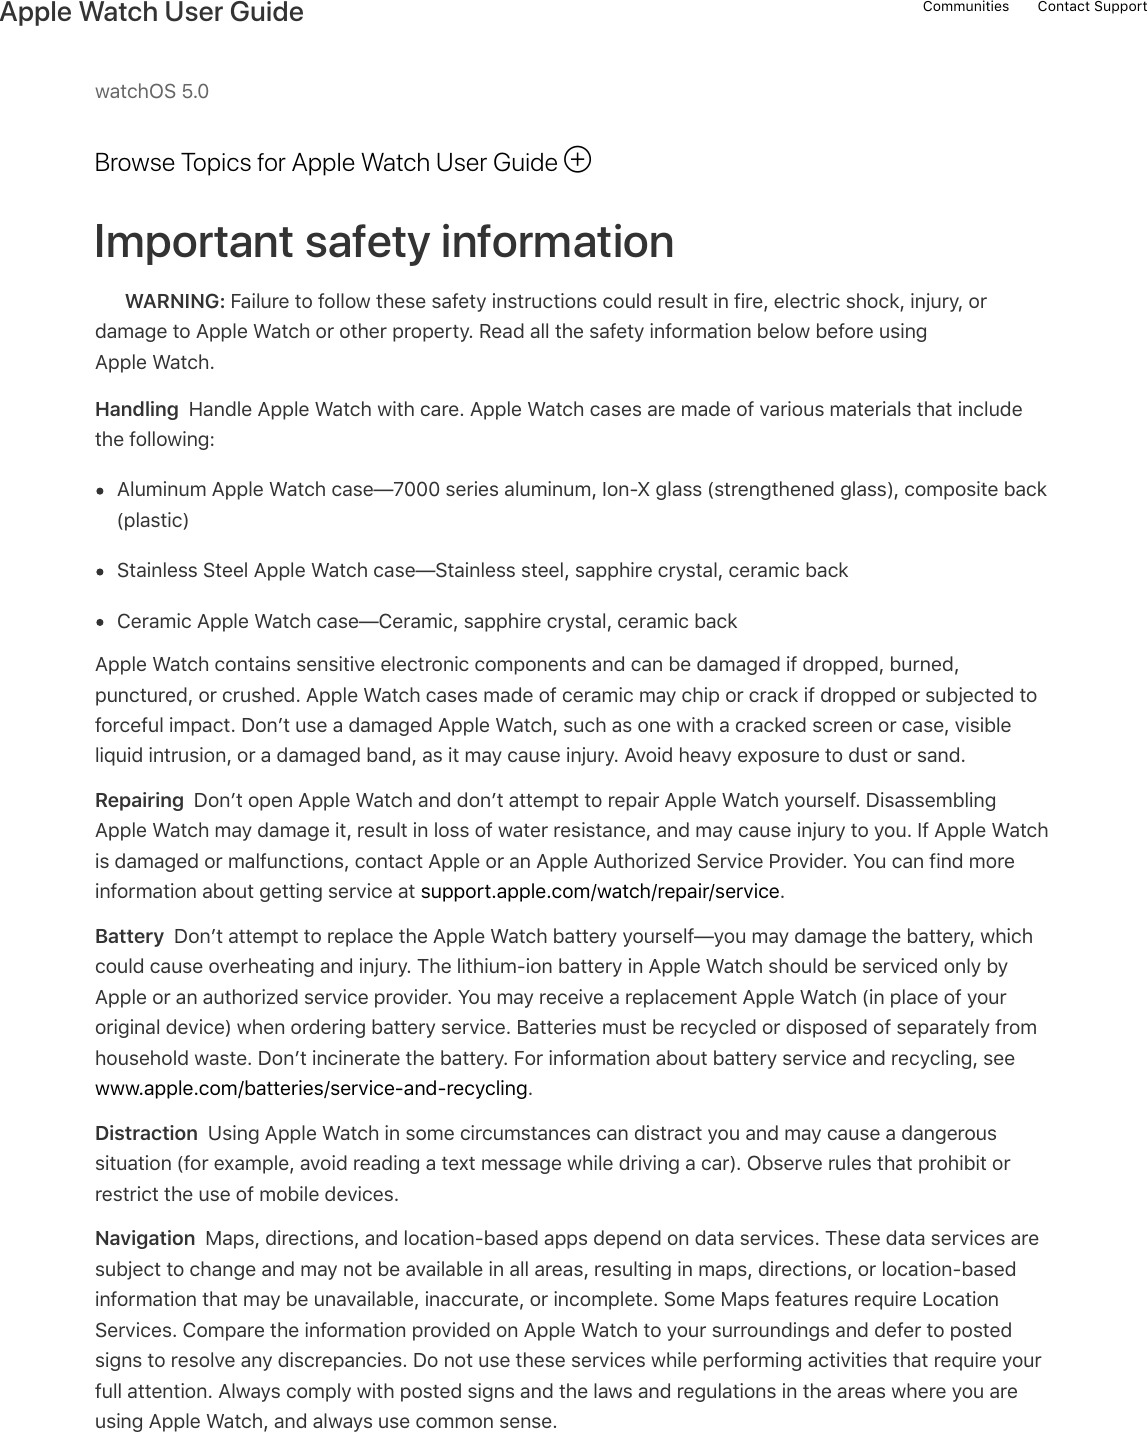 watchOS 5.0Browse Topics for Apple Watch User GuideImportant safety informationWARNING: Failure to follow these safety instructions could result in fire, electric shock, injury, ordamage to Apple Watch or other property. Read all the safety information below before usingApple Watch.Handling  Handle Apple Watch with care. Apple Watch cases are made of various materials that includethe following:Aluminum Apple Watch case—7000 series aluminum, Ion-X glass (strengthened glass), composite back(plastic)Stainless Steel Apple Watch case—Stainless steel, sapphire crystal, ceramic backCeramic Apple Watch case—Ceramic, sapphire crystal, ceramic backApple Watch contains sensitive electronic components and can be damaged if dropped, burned,punctured, or crushed. Apple Watch cases made of ceramic may chip or crack if dropped or subjected toforceful impact. Don’t use a damaged Apple Watch, such as one with a cracked screen or case, visibleliquid intrusion, or a damaged band, as it may cause injury. Avoid heavy exposure to dust or sand.Repairing  Don’t open Apple Watch and don’t attempt to repair Apple Watch yourself. DisassemblingApple Watch may damage it, result in loss of water resistance, and may cause injury to you. If Apple Watchis damaged or malfunctions, contact Apple or an Apple Authorized Service Provider. You can find moreinformation about getting service at support.apple.com/watch/repair/service.Battery  Don’t attempt to replace the Apple Watch battery yourself—you may damage the battery, whichcould cause overheating and injury. The lithium-ion battery in Apple Watch should be serviced only byApple or an authorized service provider. You may receive a replacement Apple Watch (in place of youroriginal device) when ordering battery service. Batteries must be recycled or disposed of separately fromhousehold waste. Don’t incinerate the battery. For information about battery service and recycling, seewww.apple.com/batteries/service-and-recycling.Distraction  Using Apple Watch in some circumstances can distract you and may cause a dangeroussituation (for example, avoid reading a text message while driving a car). Observe rules that prohibit orrestrict the use of mobile devices.Navigation  Maps, directions, and location-based apps depend on data services. These data services aresubject to change and may not be available in all areas, resulting in maps, directions, or location-basedinformation that may be unavailable, inaccurate, or incomplete. Some Maps features require LocationServices. Compare the information provided on Apple Watch to your surroundings and defer to postedsigns to resolve any discrepancies. Do not use these services while performing activities that require yourfull attention. Always comply with posted signs and the laws and regulations in the areas where you areusing Apple Watch, and always use common sense.!Communities Contact SupportApple Watch User Guide